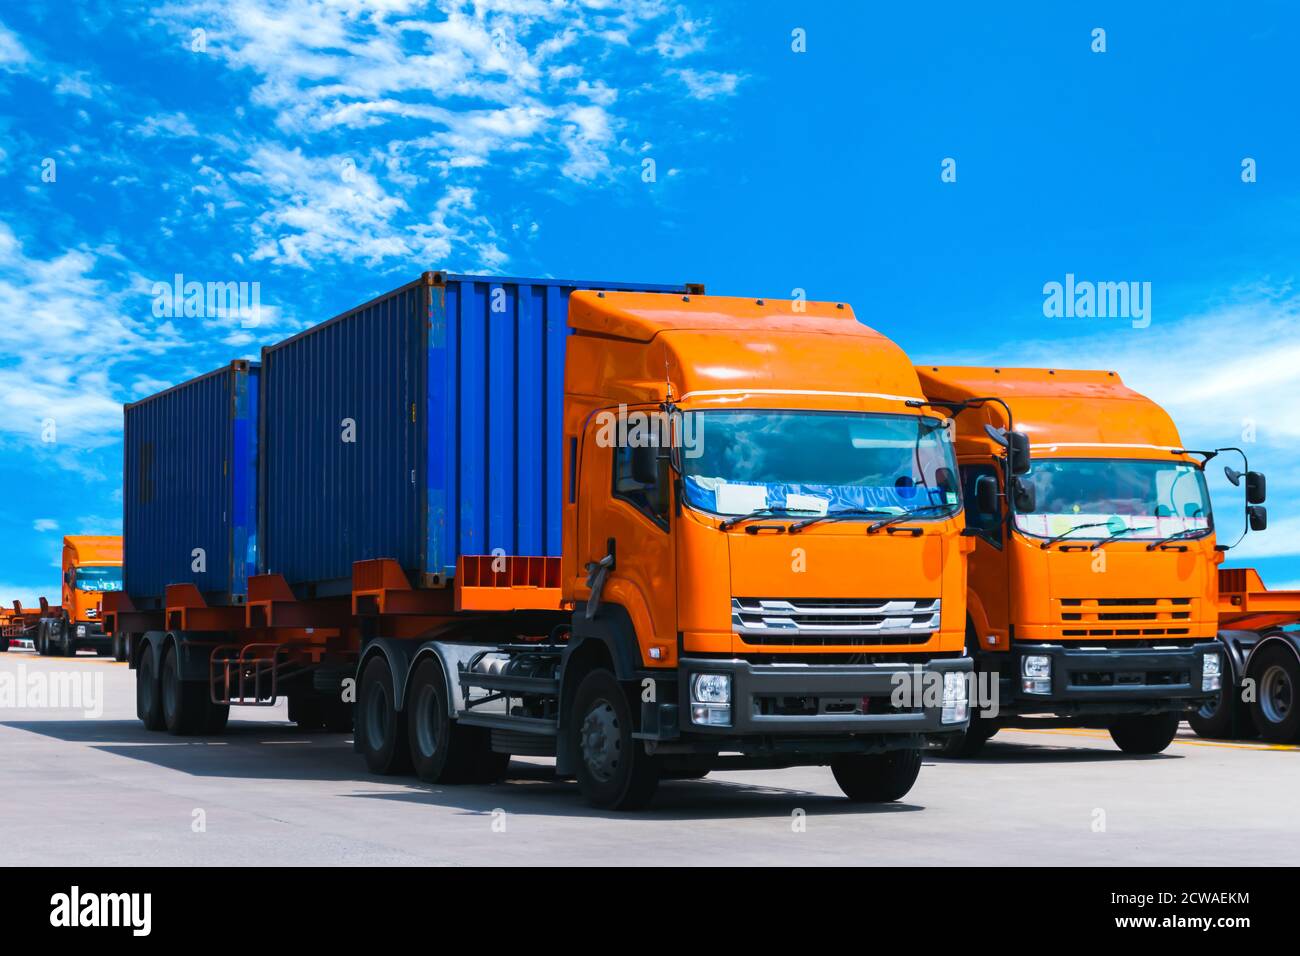 Truck trailer load with two twenty-foot containers delivering to factory. Stock Photo